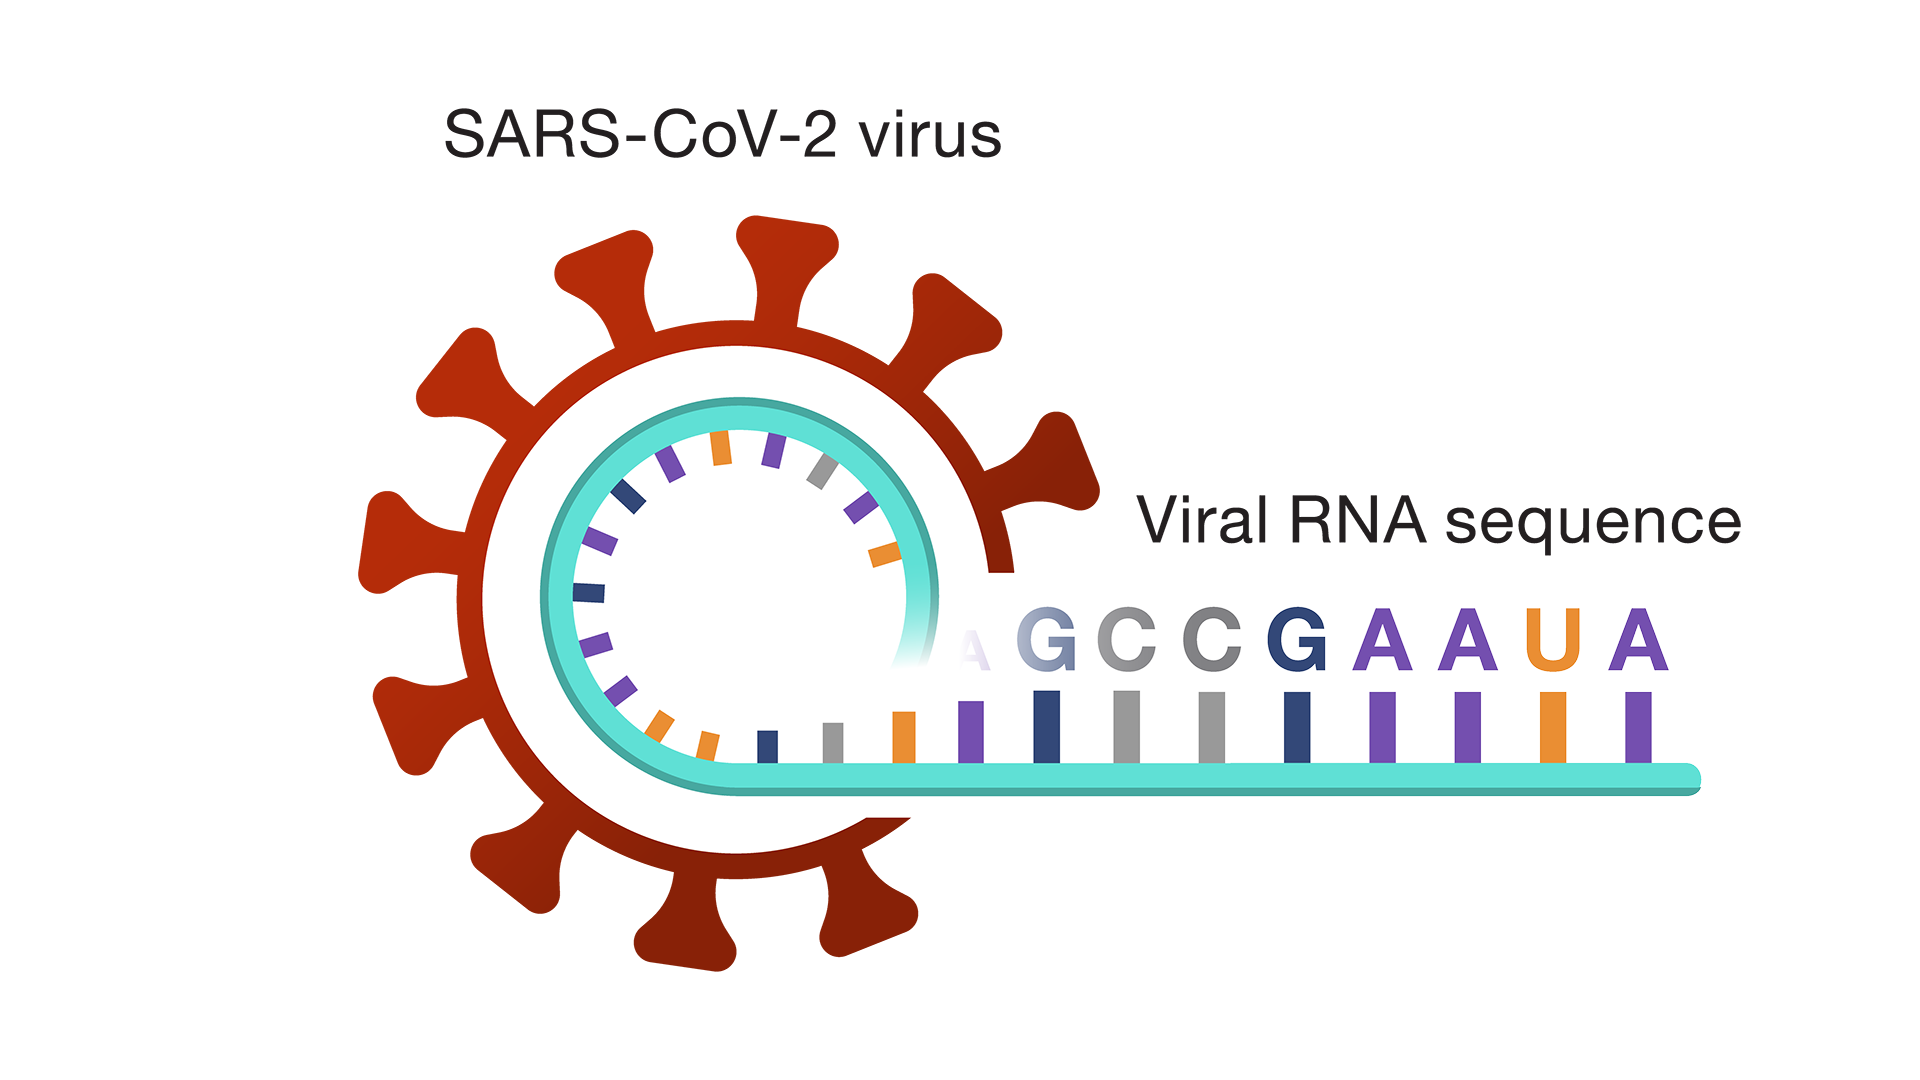 Viral RNA sequence of the SARS-CoV-2 virus 